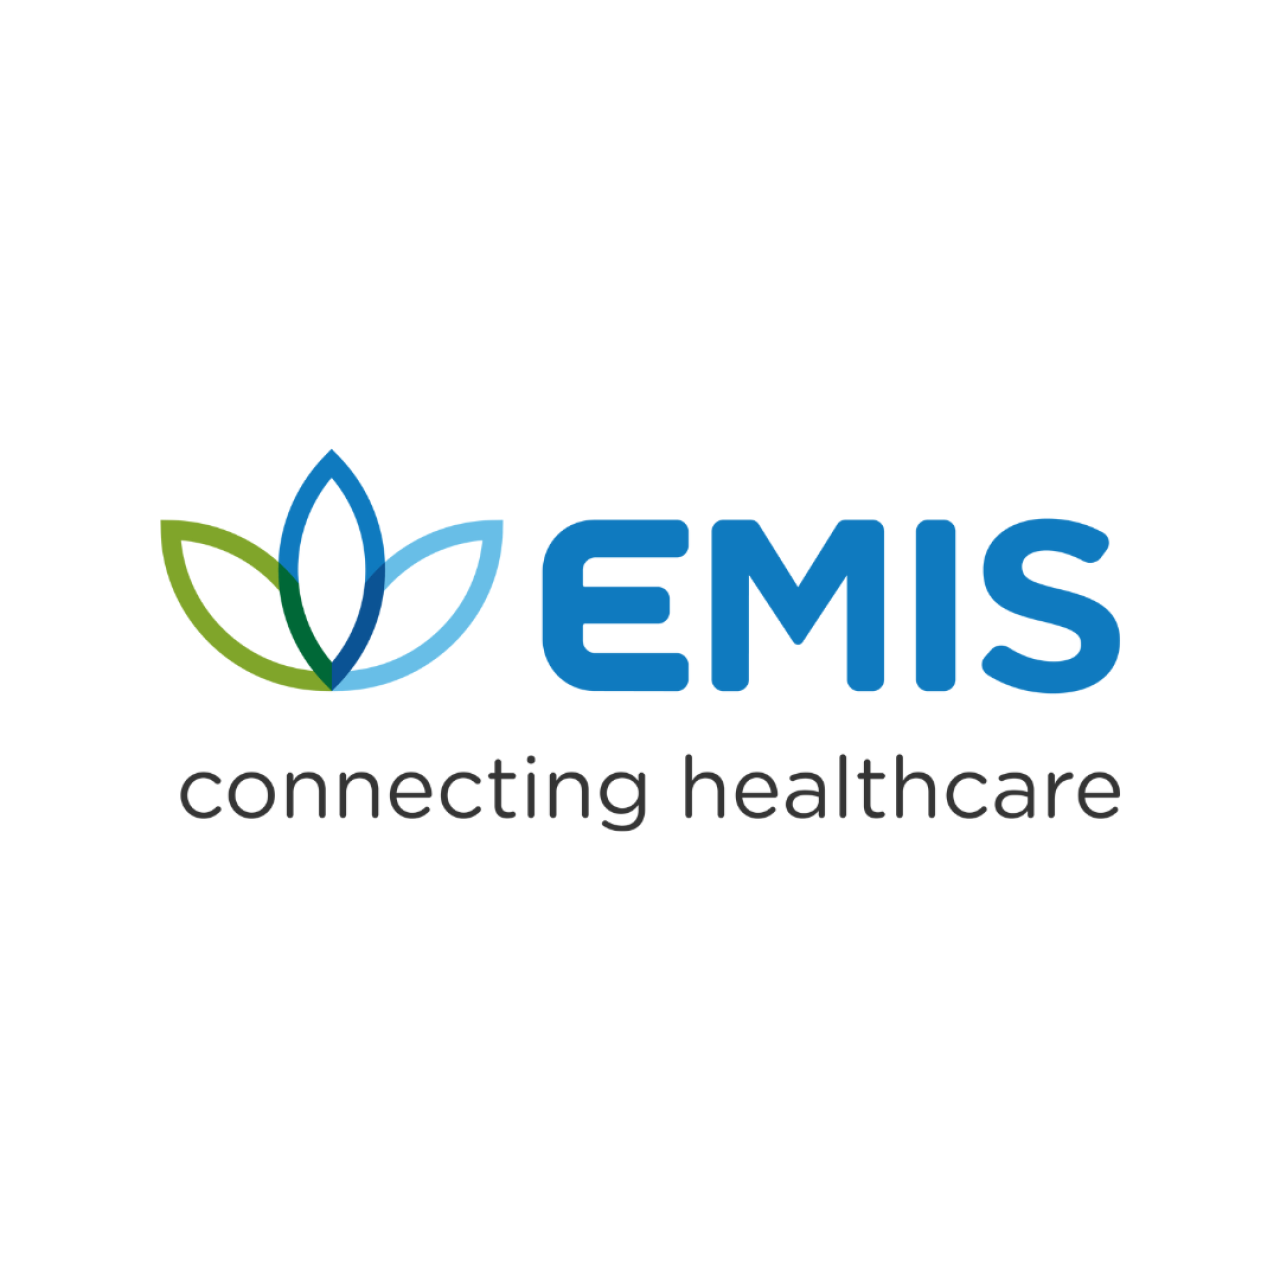 EMIS Health automate ServiceNow testing, reducing manual effort by 80%.